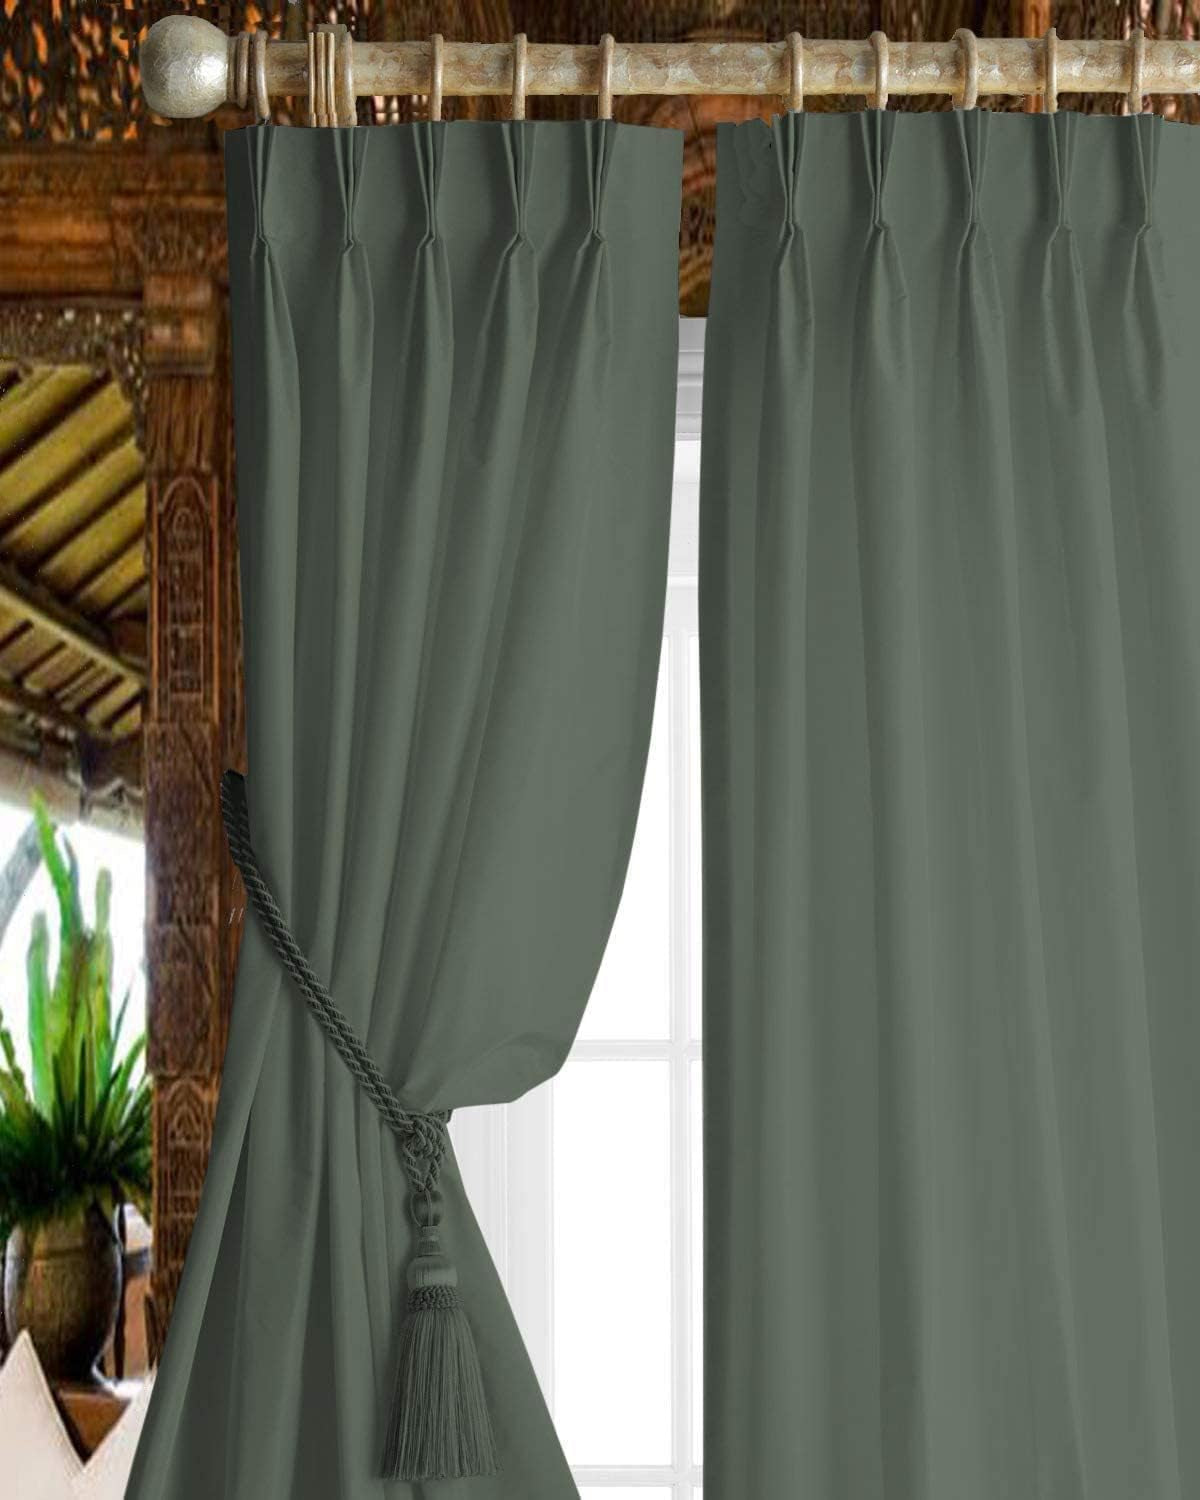 Magic Drapes Pinch Pleated Curtains Triple Pinch Pleat Drapes with Tiebacks & Hooks Blackout Thermal Room Darkening Window Curtains for Living Room, Bedroom, Hall W(26"+26") L45 (2 Panels, Royal Blue)  Magic Drapes Solid - Dark Grey 42"X 54" 